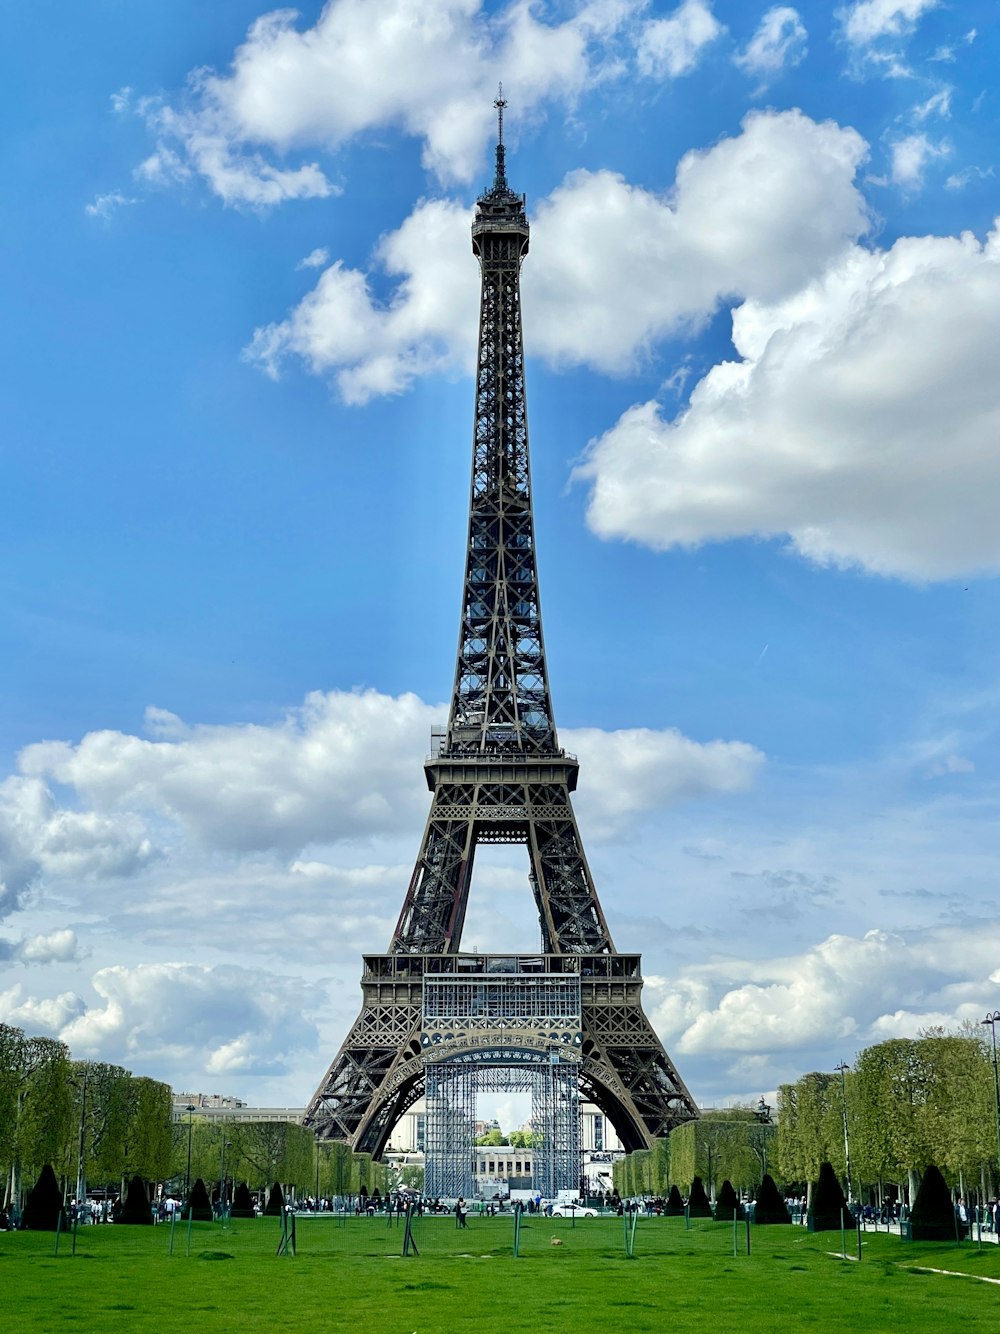 the eiffel tower towering over a lush green park